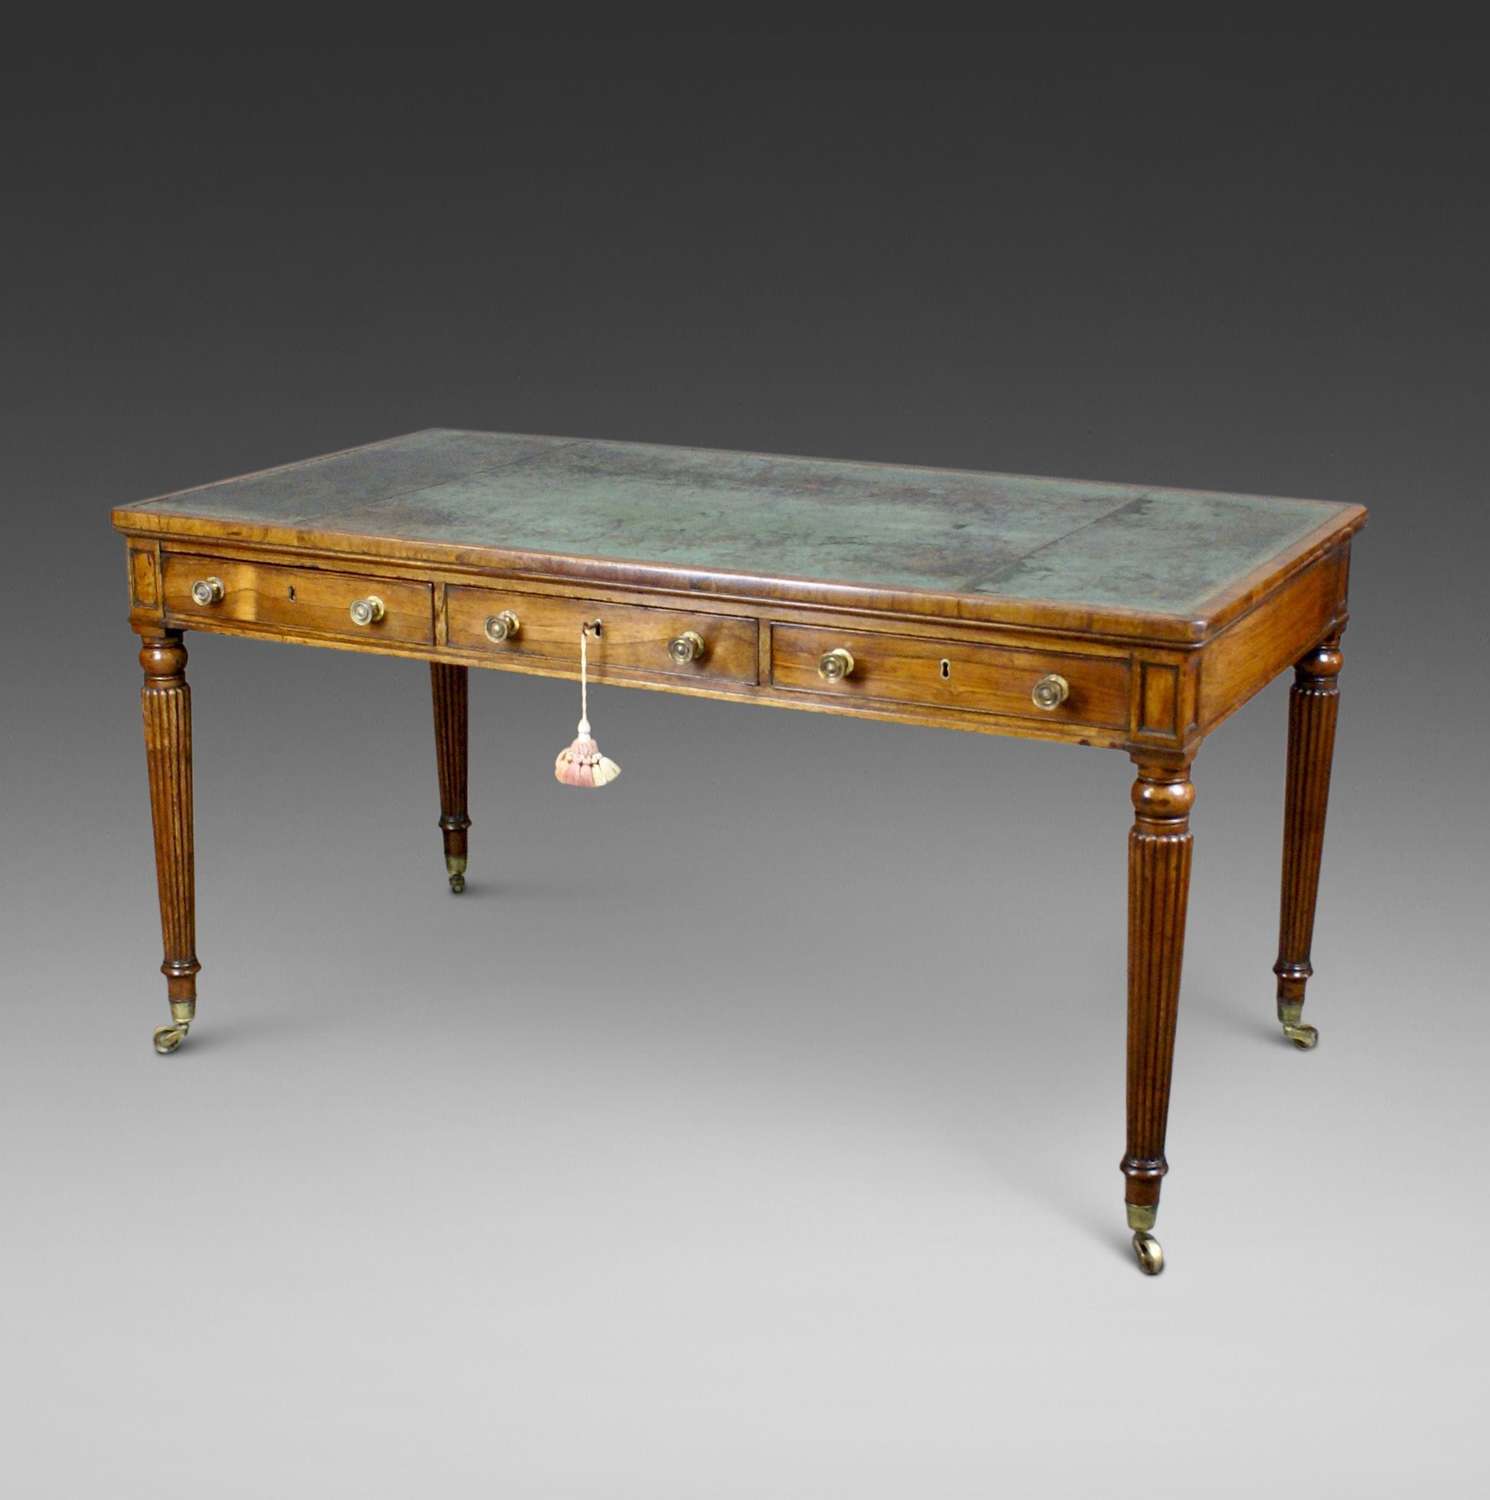 A  fine late George III period rosewood writing/library table